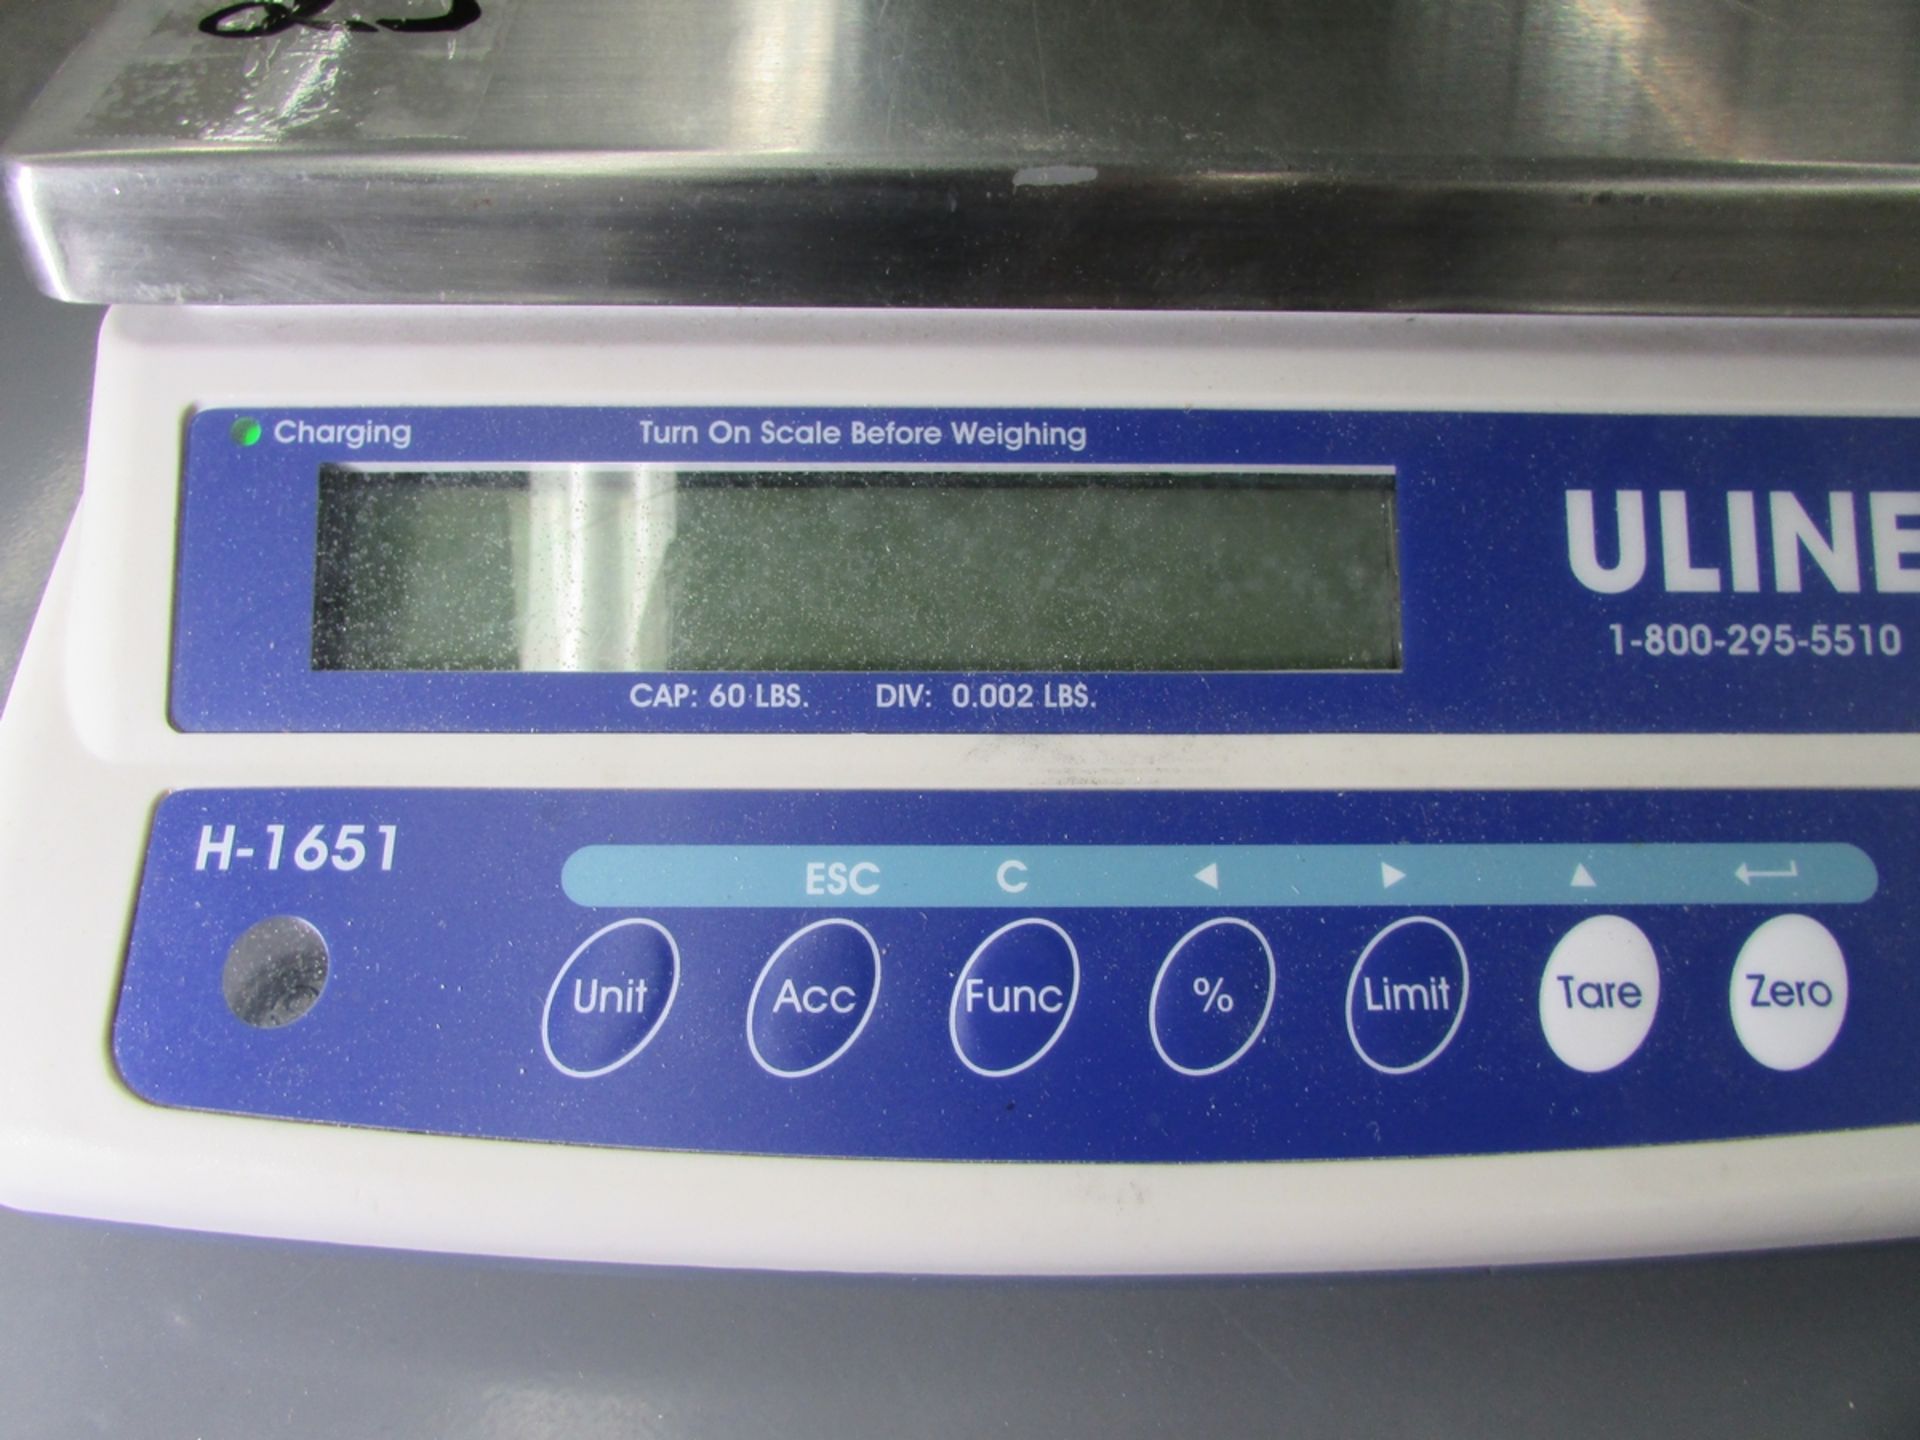 Uline H-1651 60x0.002Lb. Digital Counting Scale - Image 3 of 5